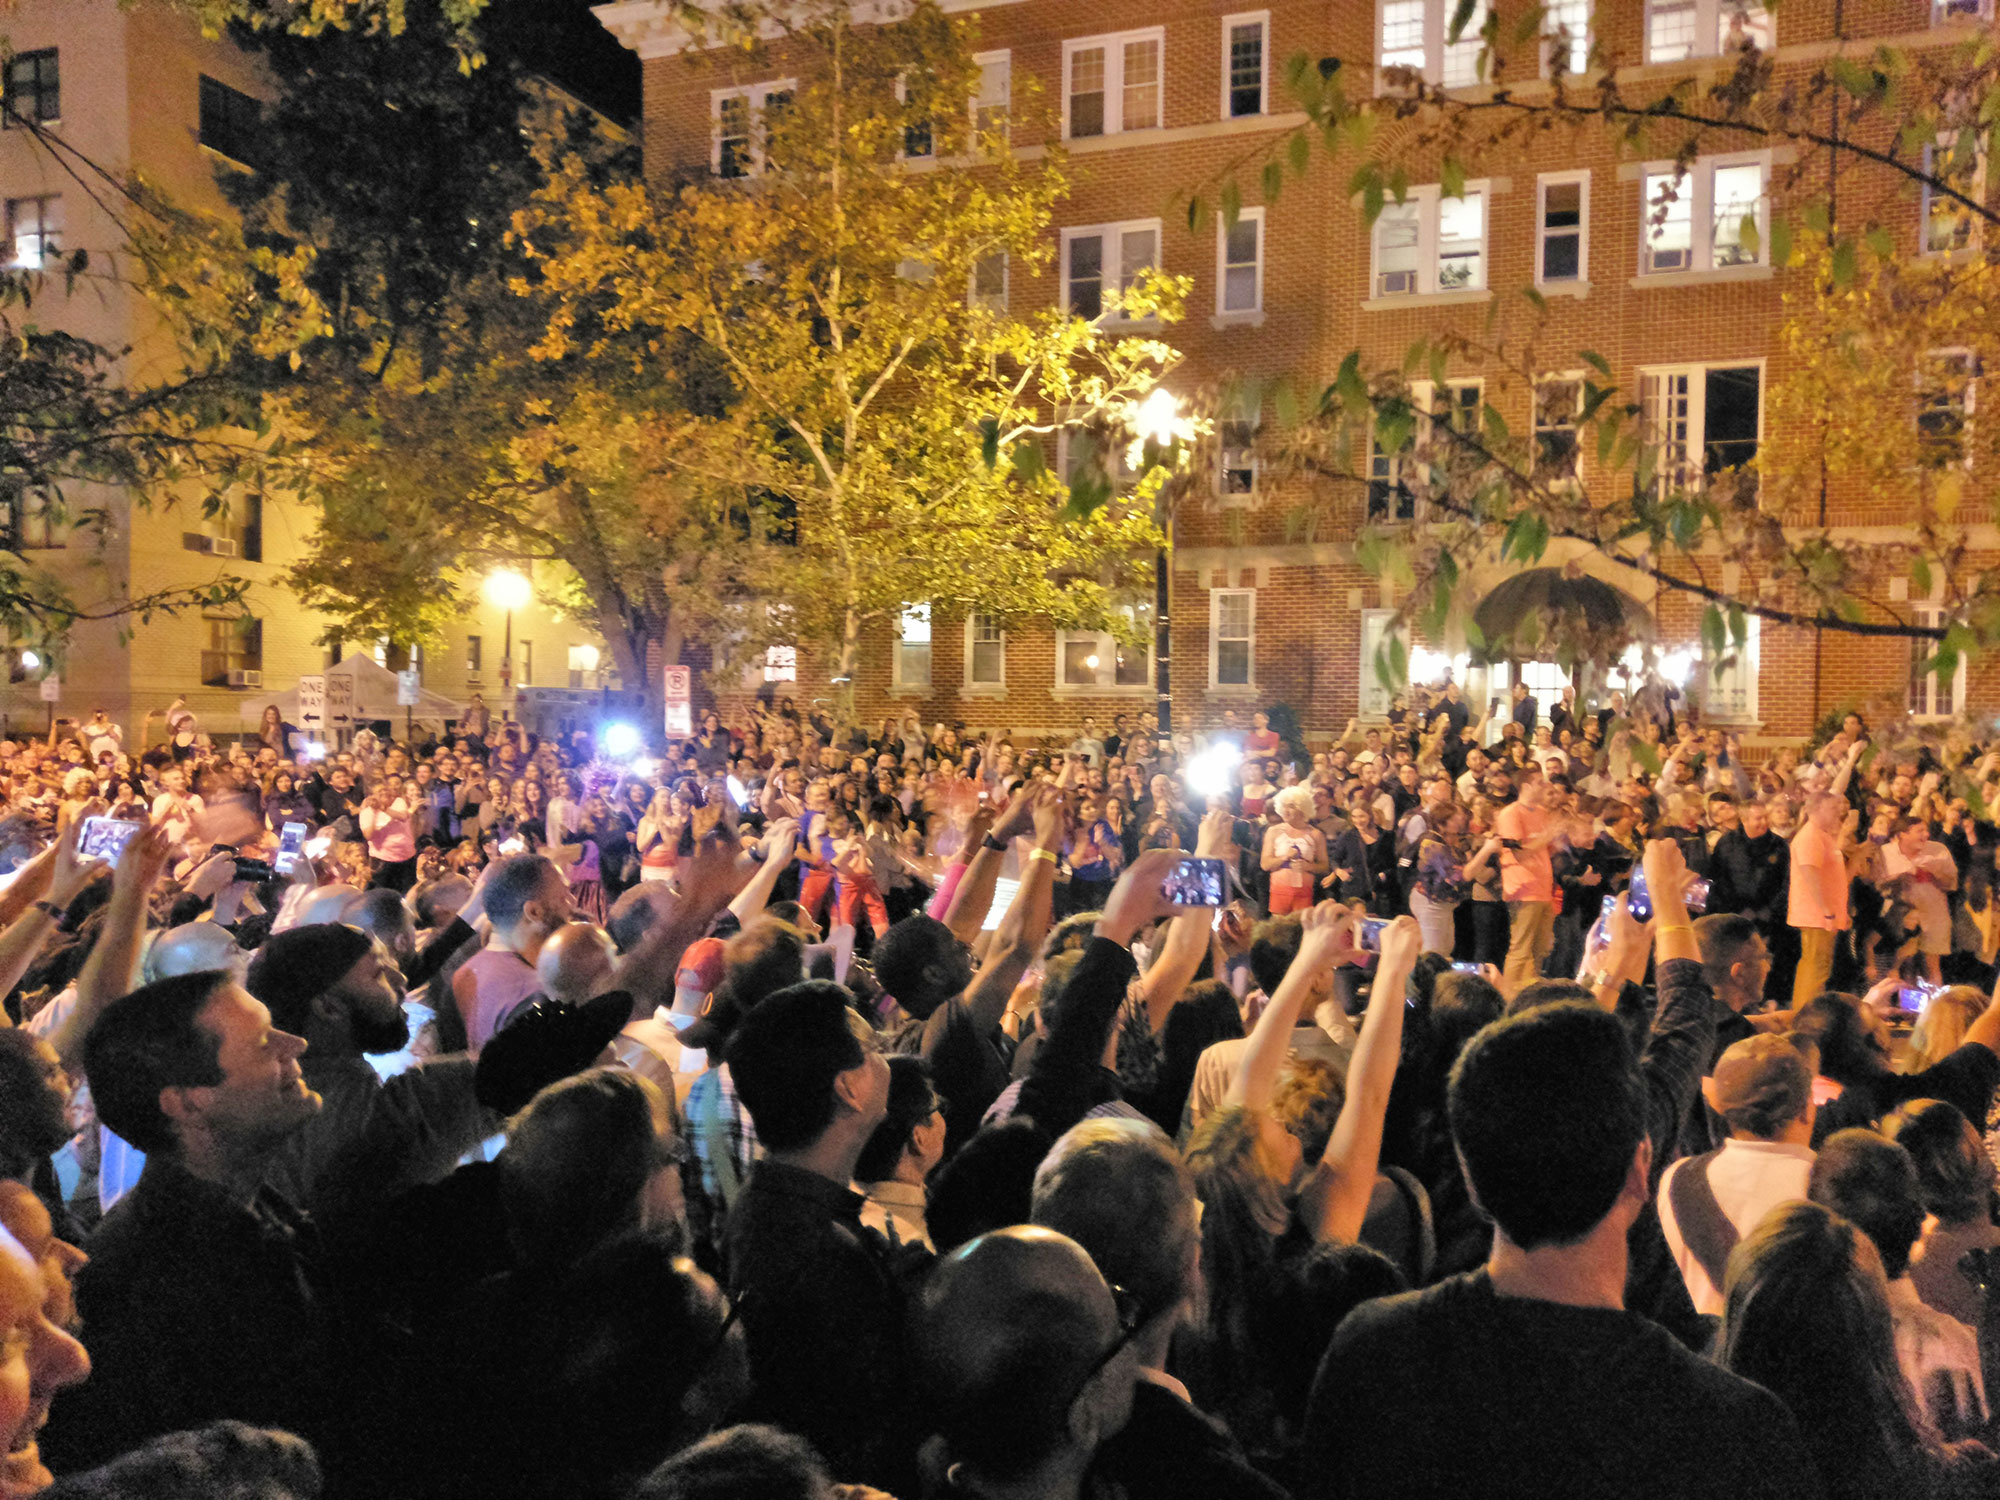 Spectators photographing the first racers at the Washington D.C. High Heel Race.